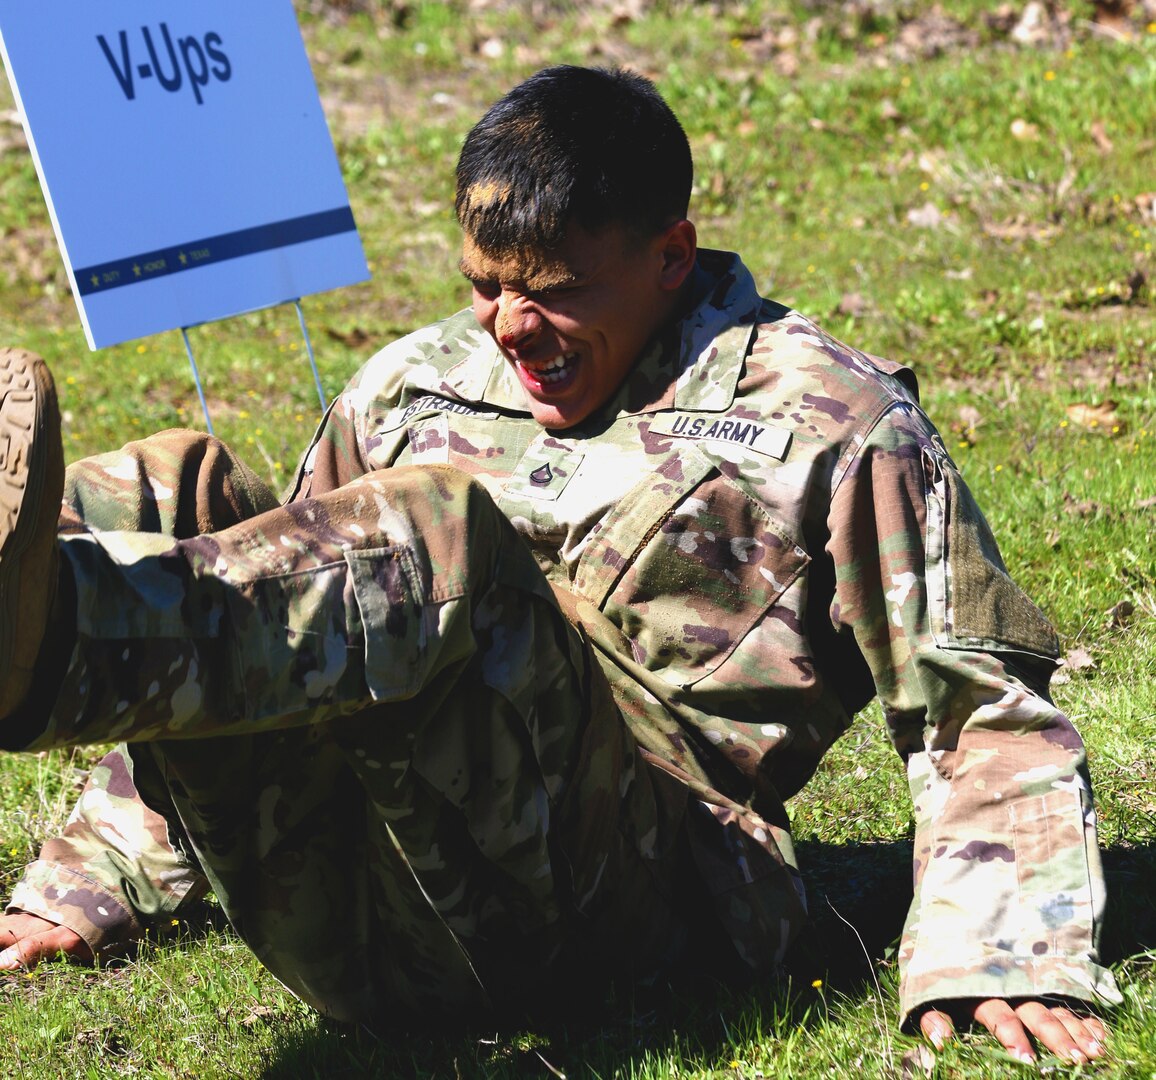 Army Pfc. Maximilliano Estrada of the 71st Expeditionary Military Intelligence Brigade performs V-ups during the obstacle course portion of the Texas Military Department’s 2020 Best Warrior Competition March 5, 2020, at Camp Swift near Bastrop, Texas. Estrada, who began bleeding halfway through the event, refused to stop and completed the course.